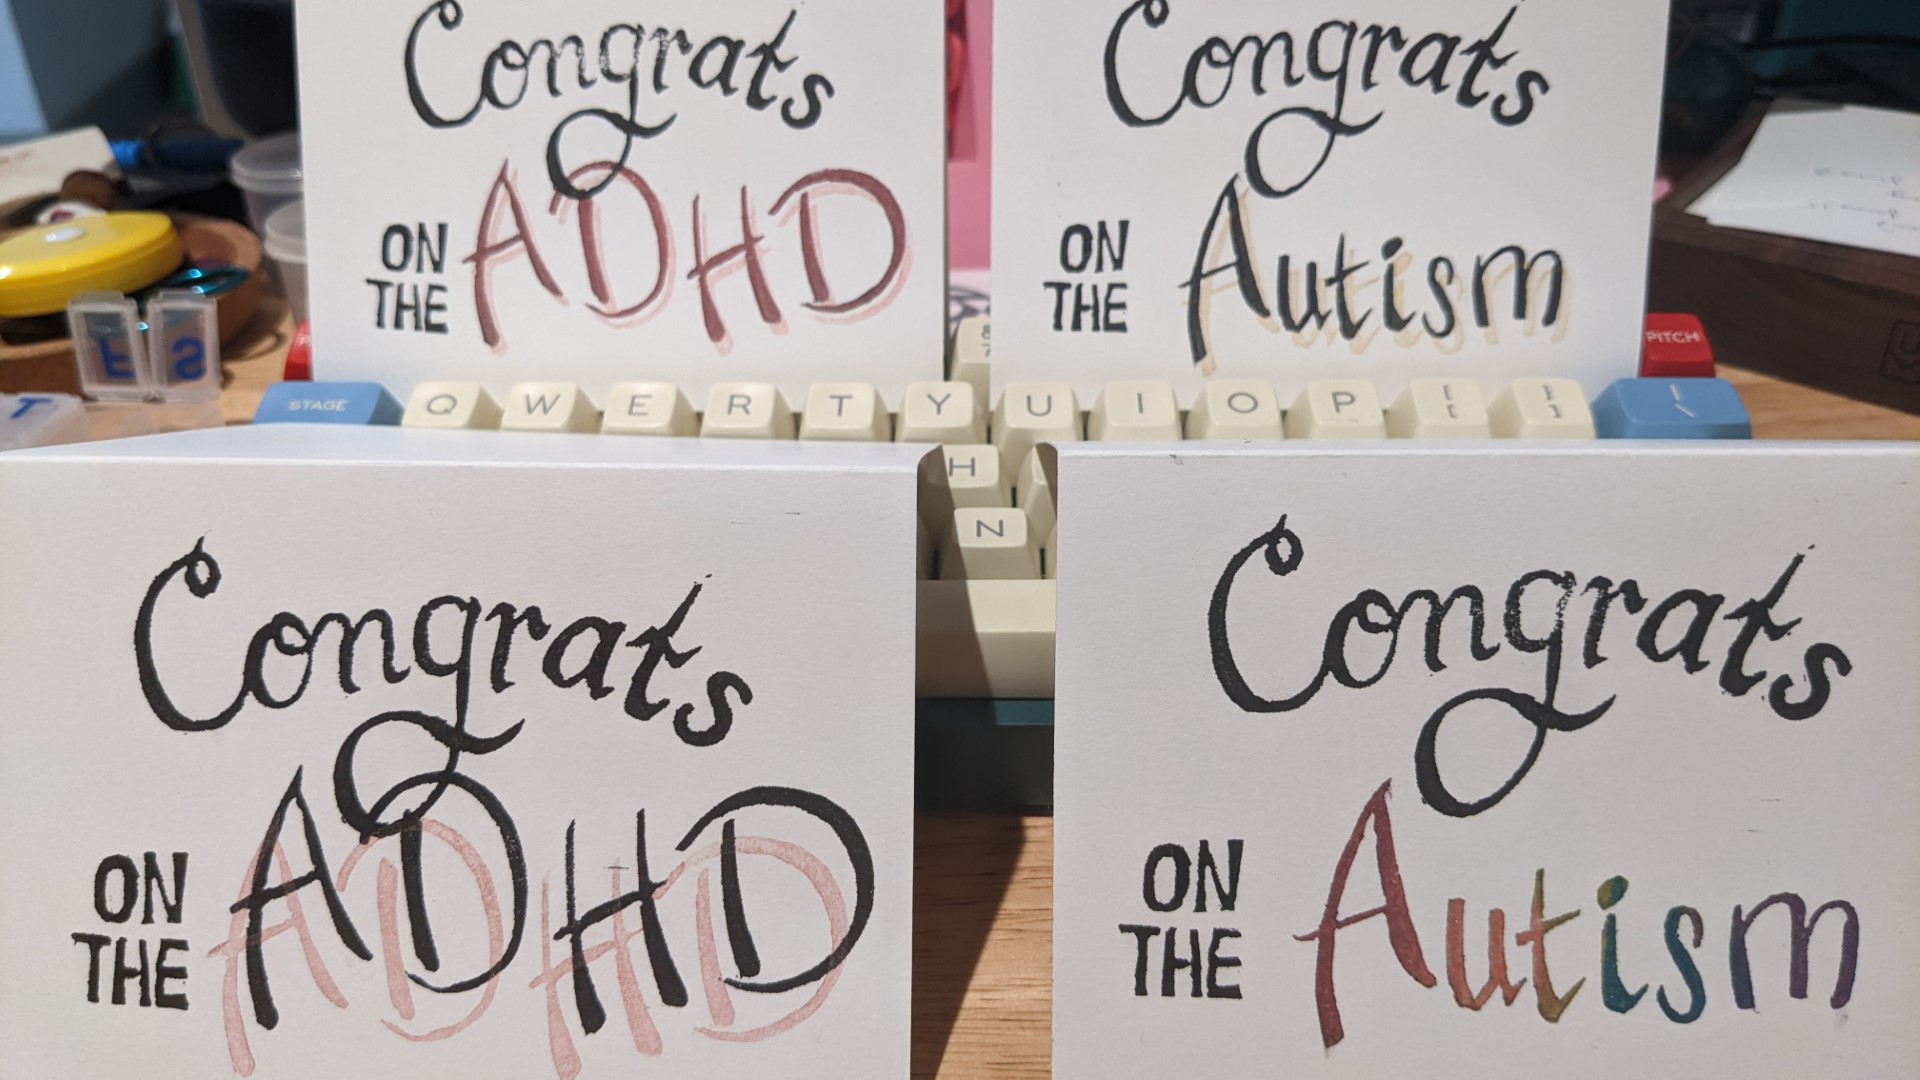 4 greeting cards propped up on a keyboard. On the right hand side, two cards read 'Congrats on the Autism'; one in rainbow ink and one in black ink with a glittery gold shadow. On the left, two cards read 'Congrats on the ADHD'; one in red and one in black, both with glittery pink shadows.